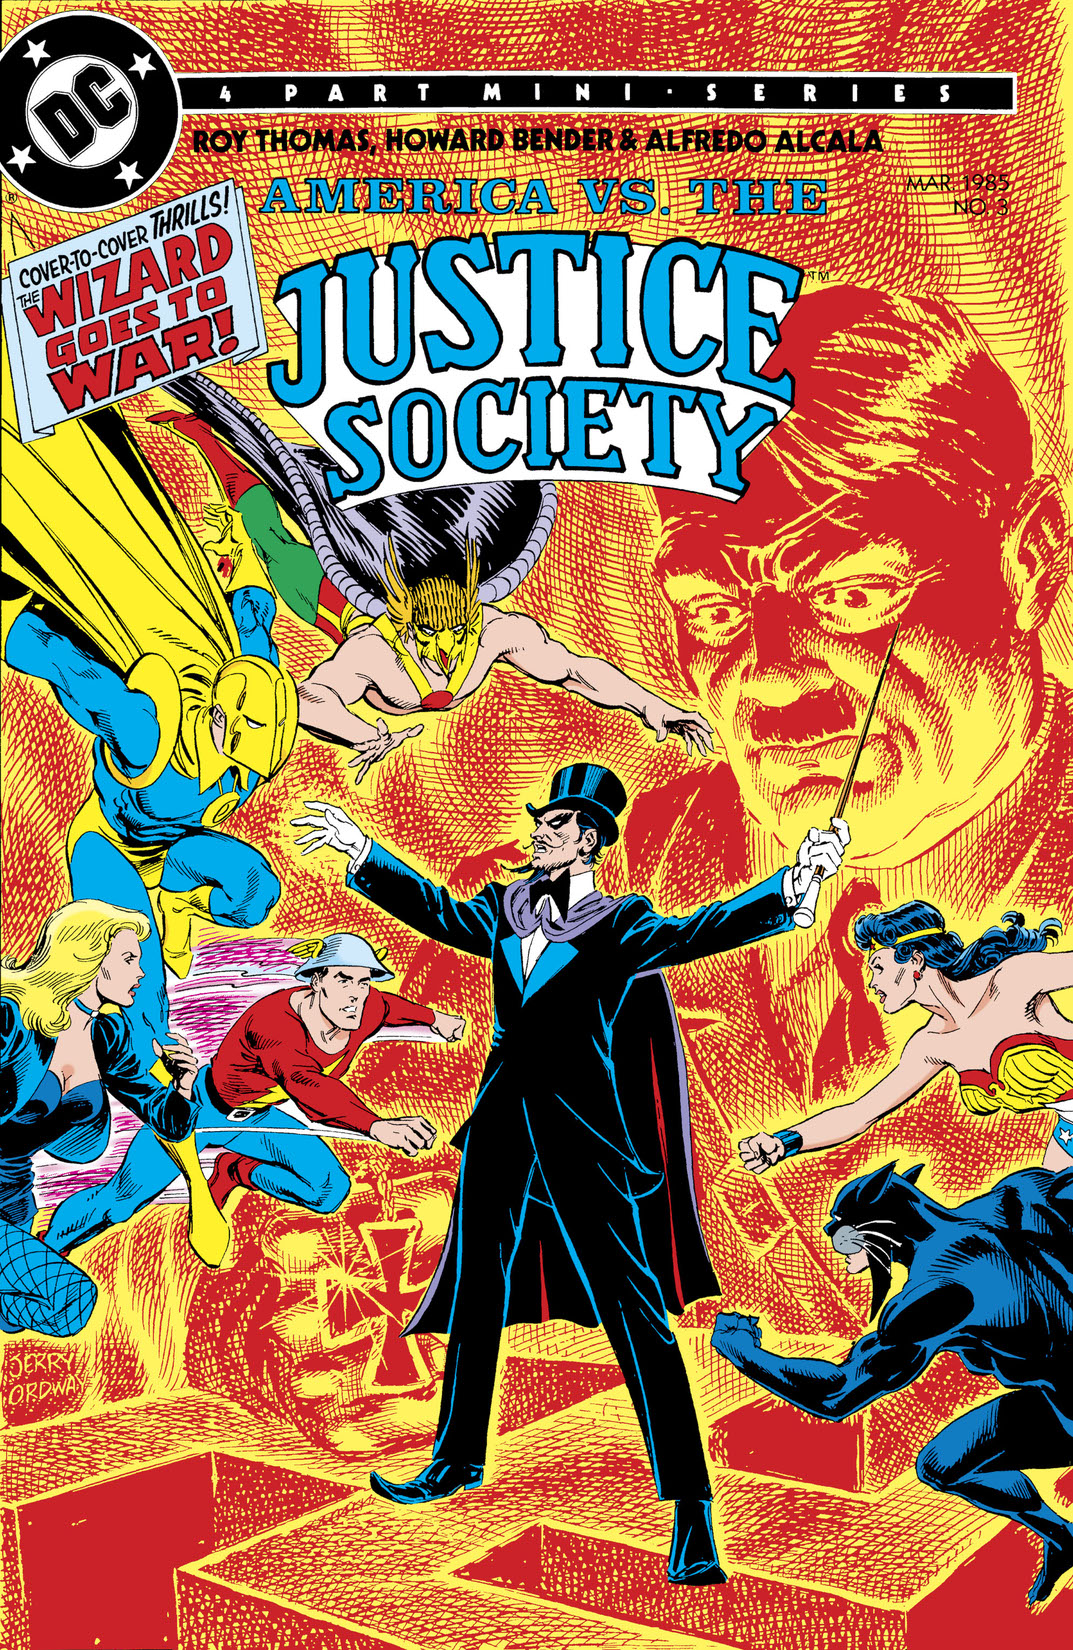 America vs. The Justice Society #3 preview images